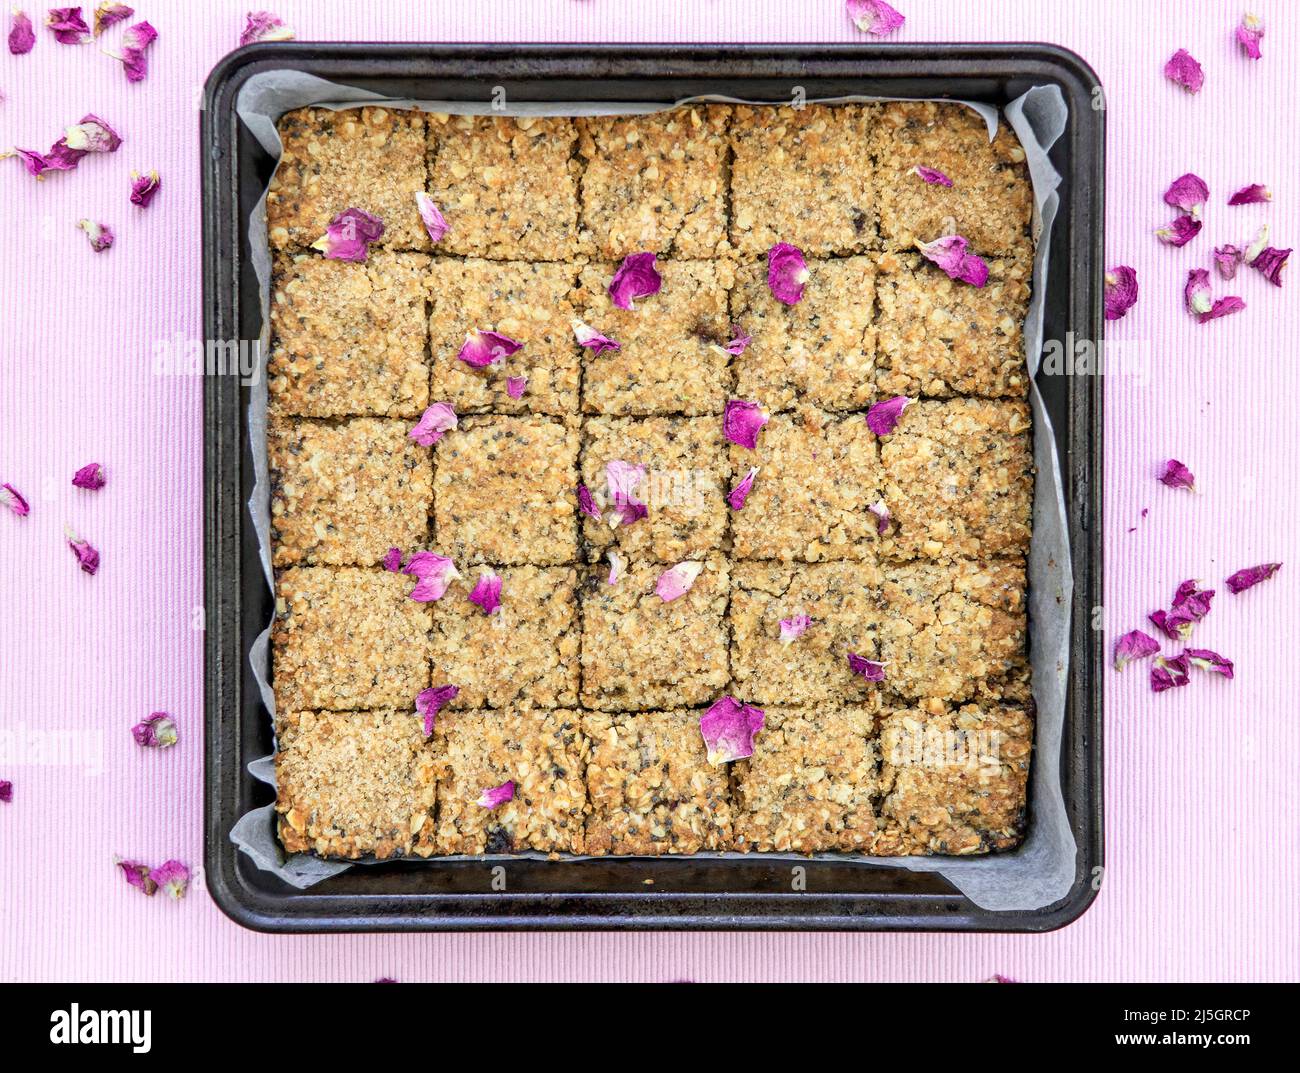 Home made tray bake of Date and Oat slices. Cut into squares Stock Photo